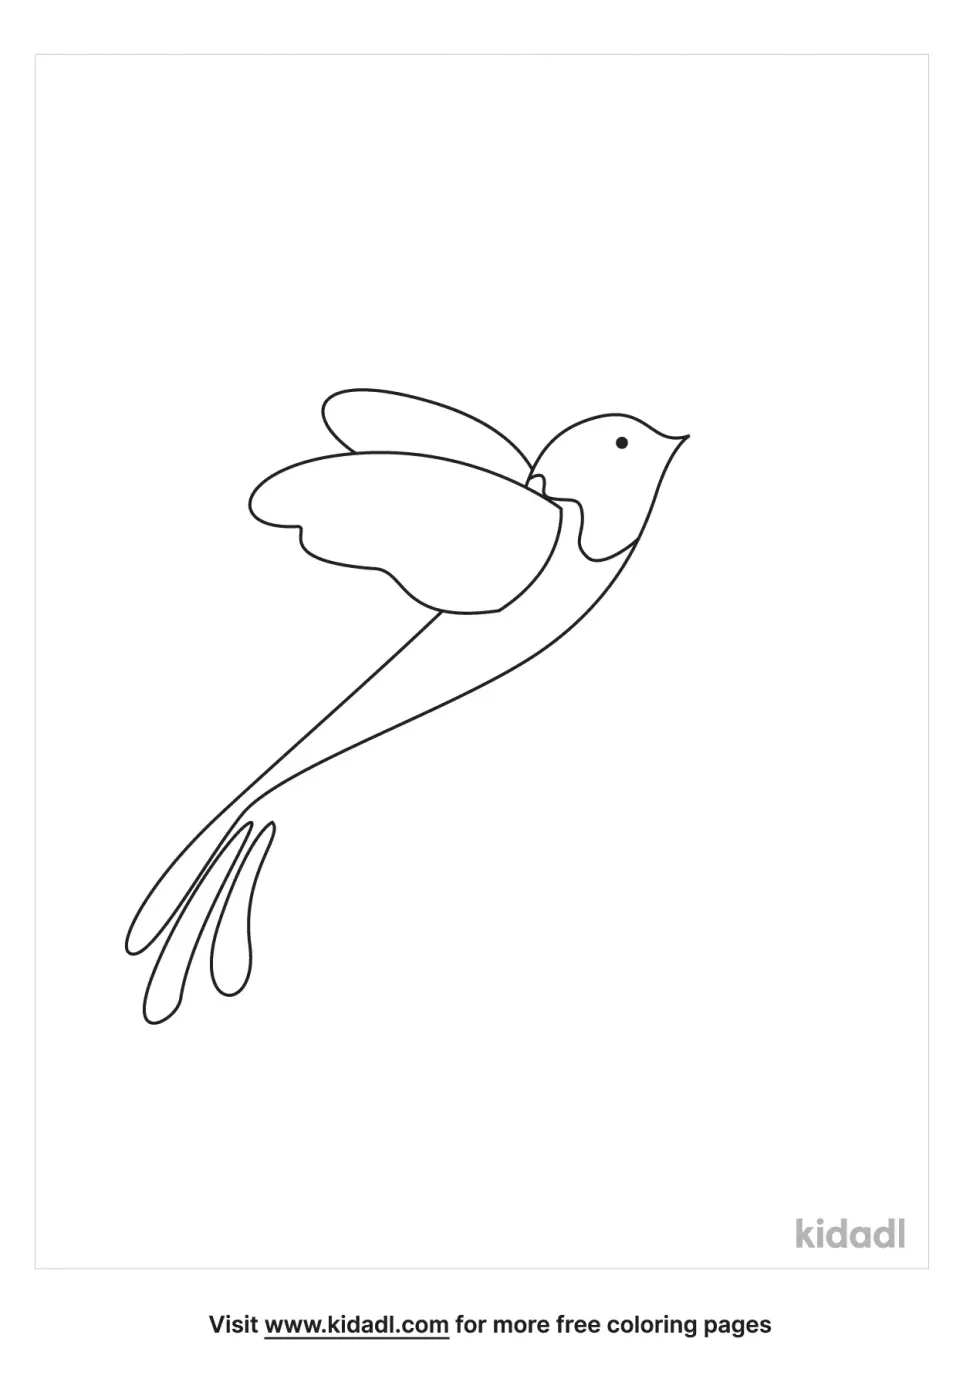 Widowbird Coloring Page